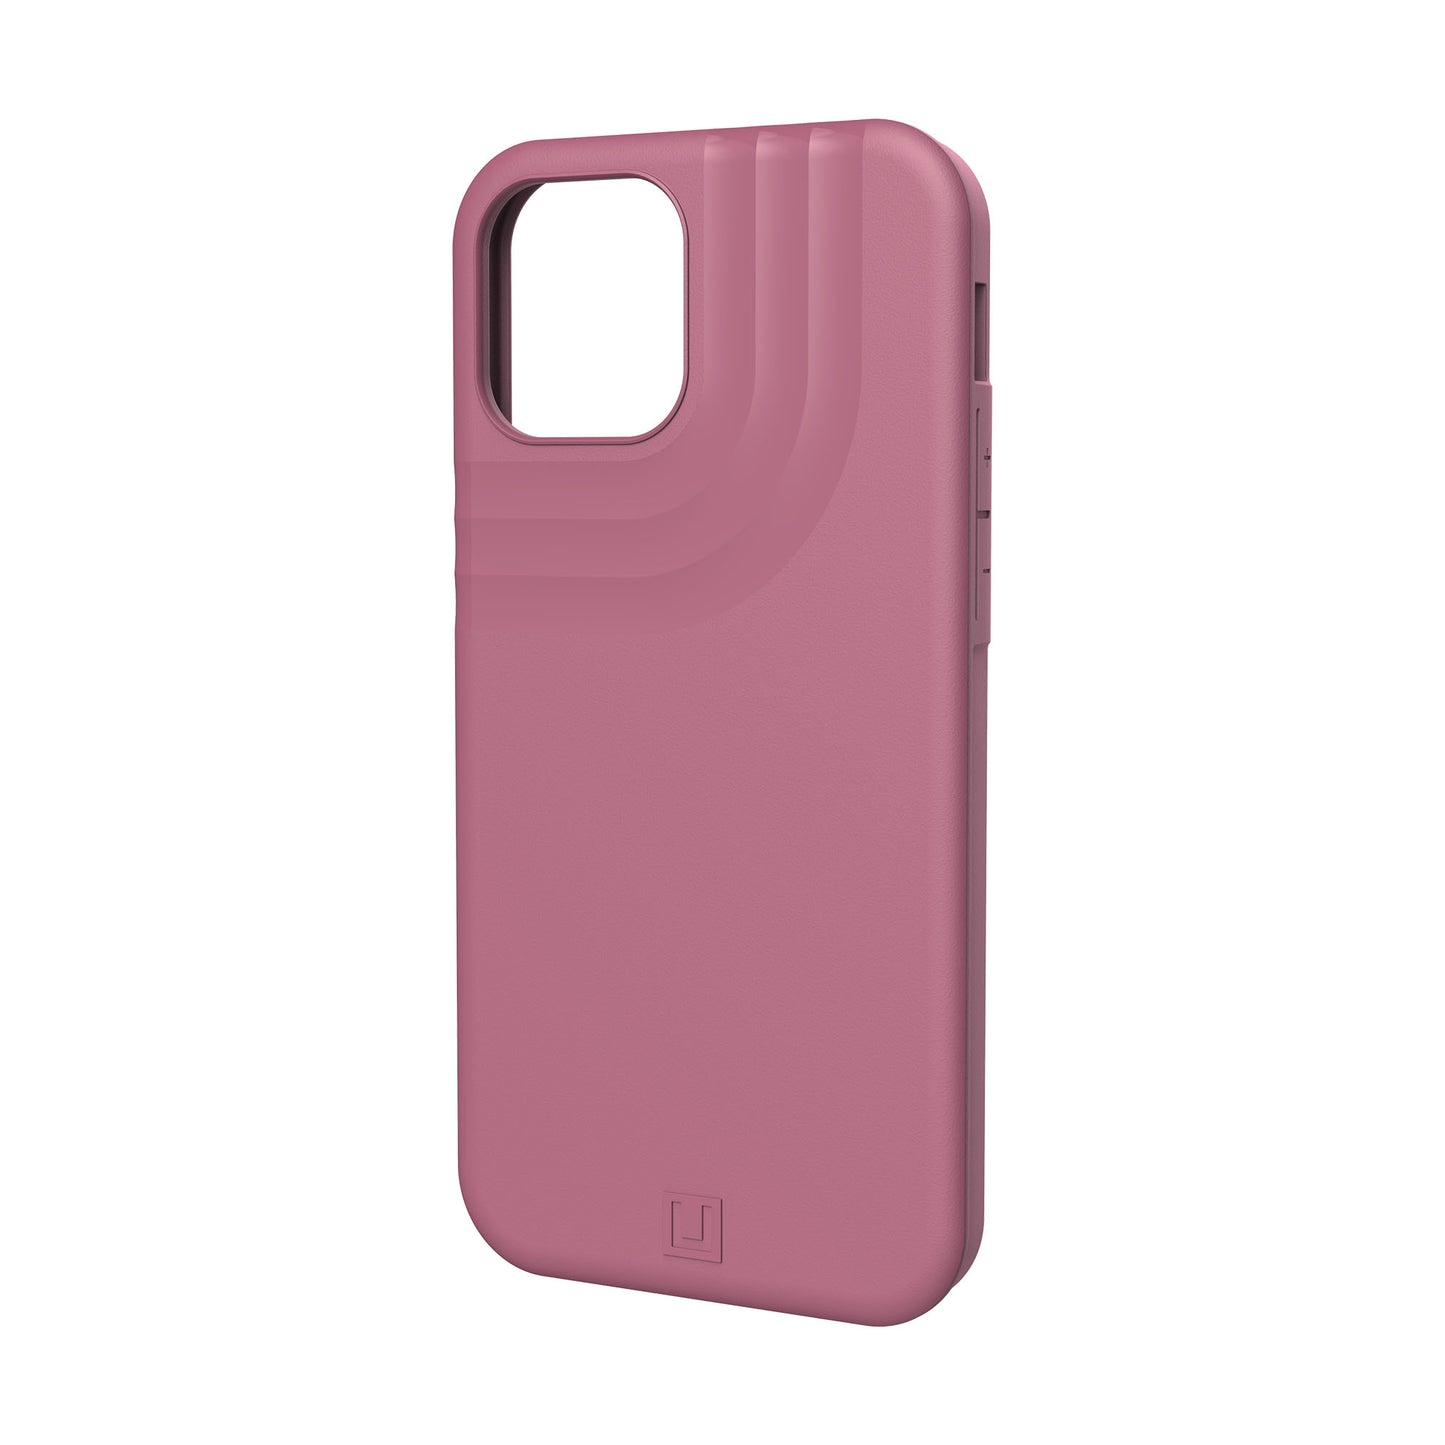 U BY UAG Anchor Case for iPhone 12/12 Pro - Dusty Rose